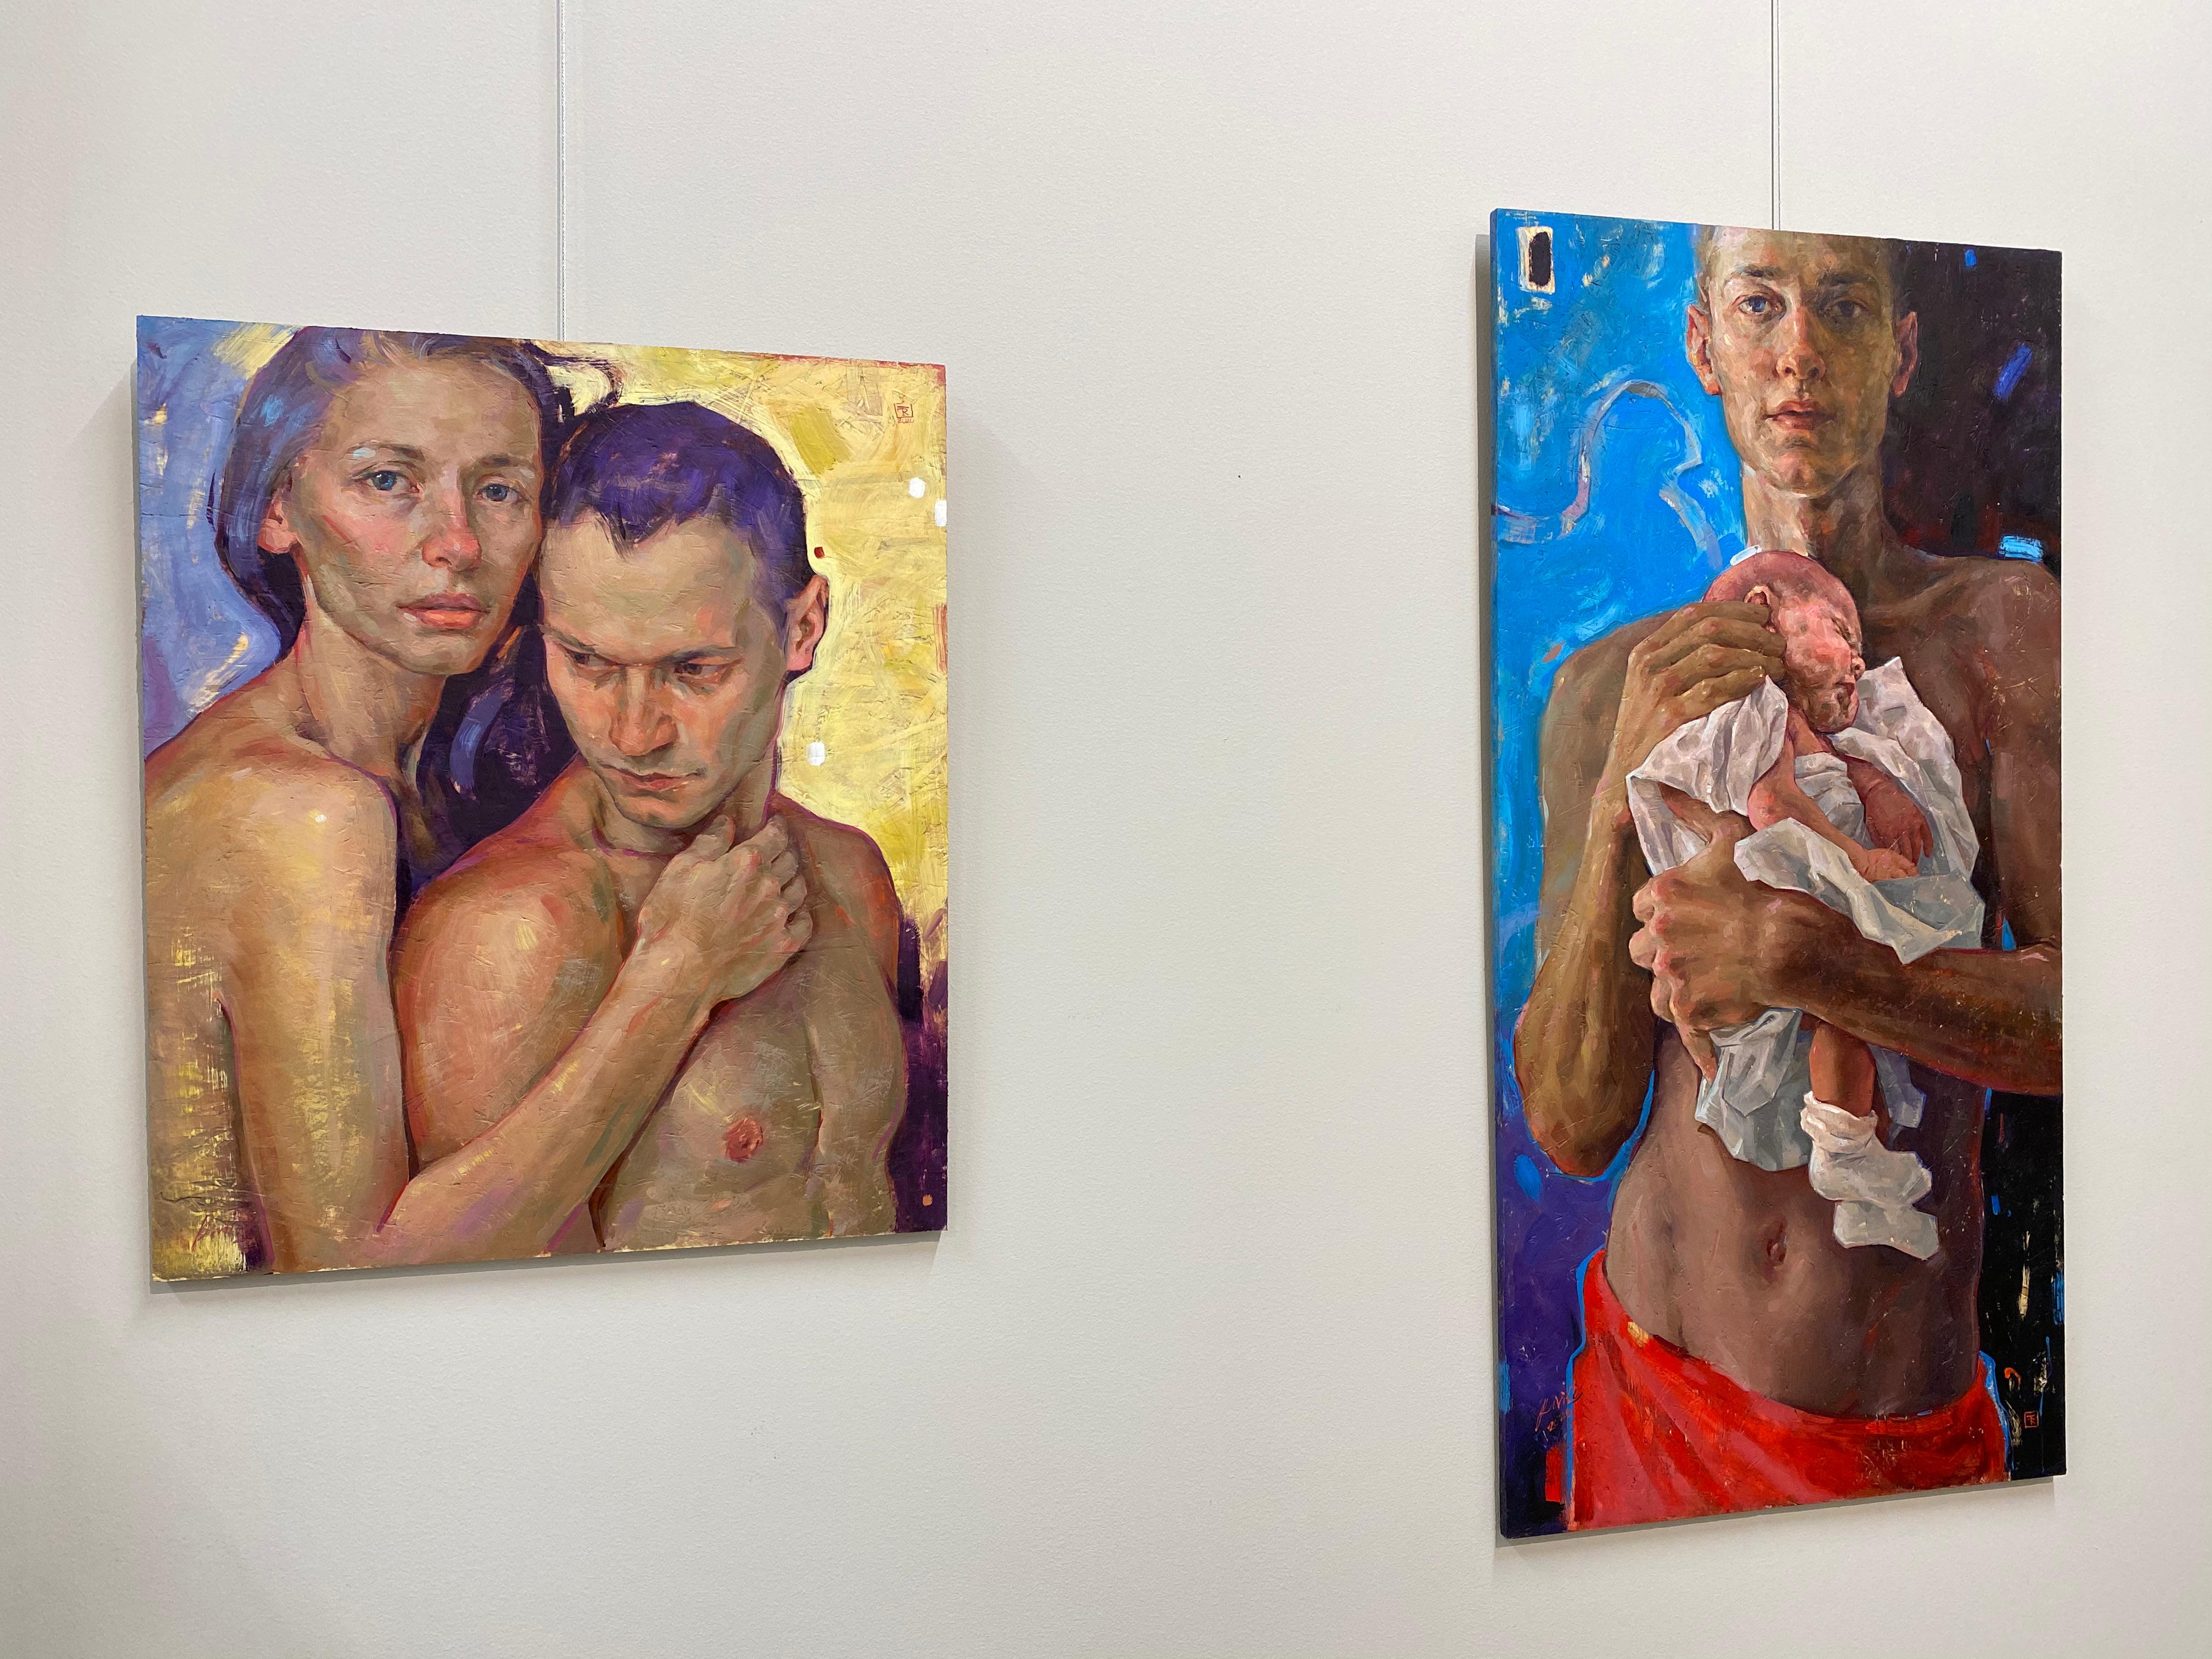 Reflection came 21st- century Contemporary Paintings of a young man and his baby - Brown Figurative Painting by Tania Rivilis